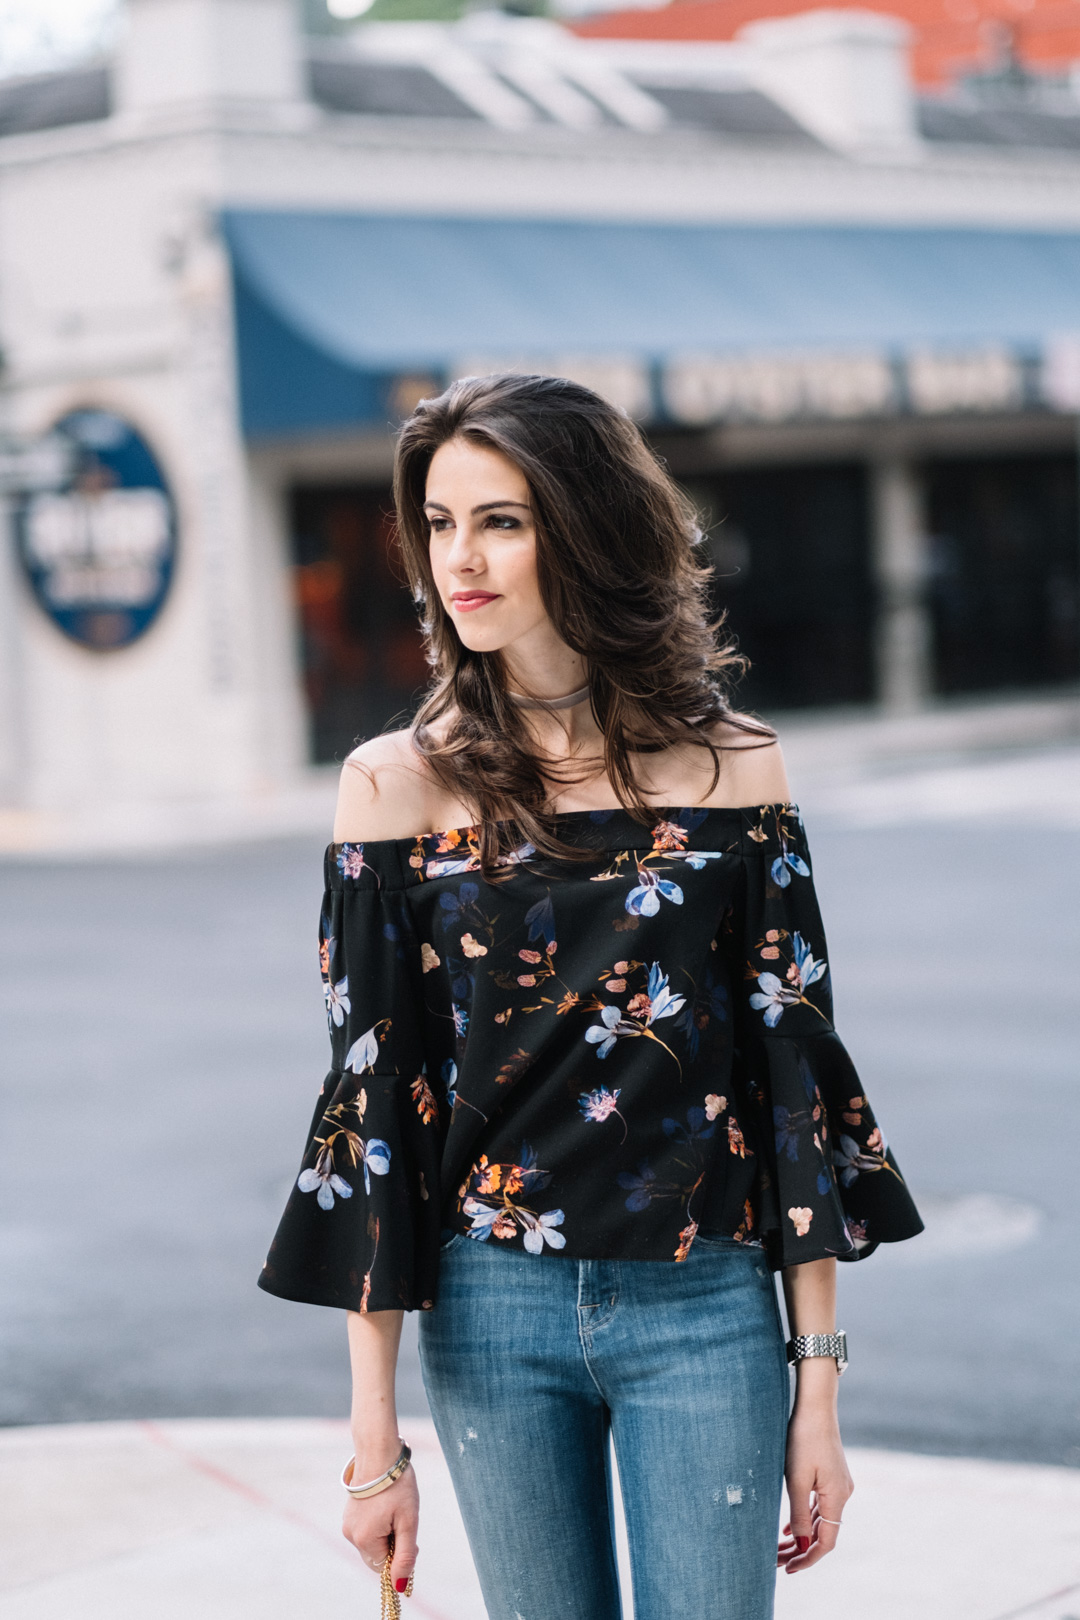 Jackie Roque styling a Toyshop off-the-shoulder floral top, with J Brand Alana ripped jeans, Chloe Drew bag and Joie Pippi shoes.